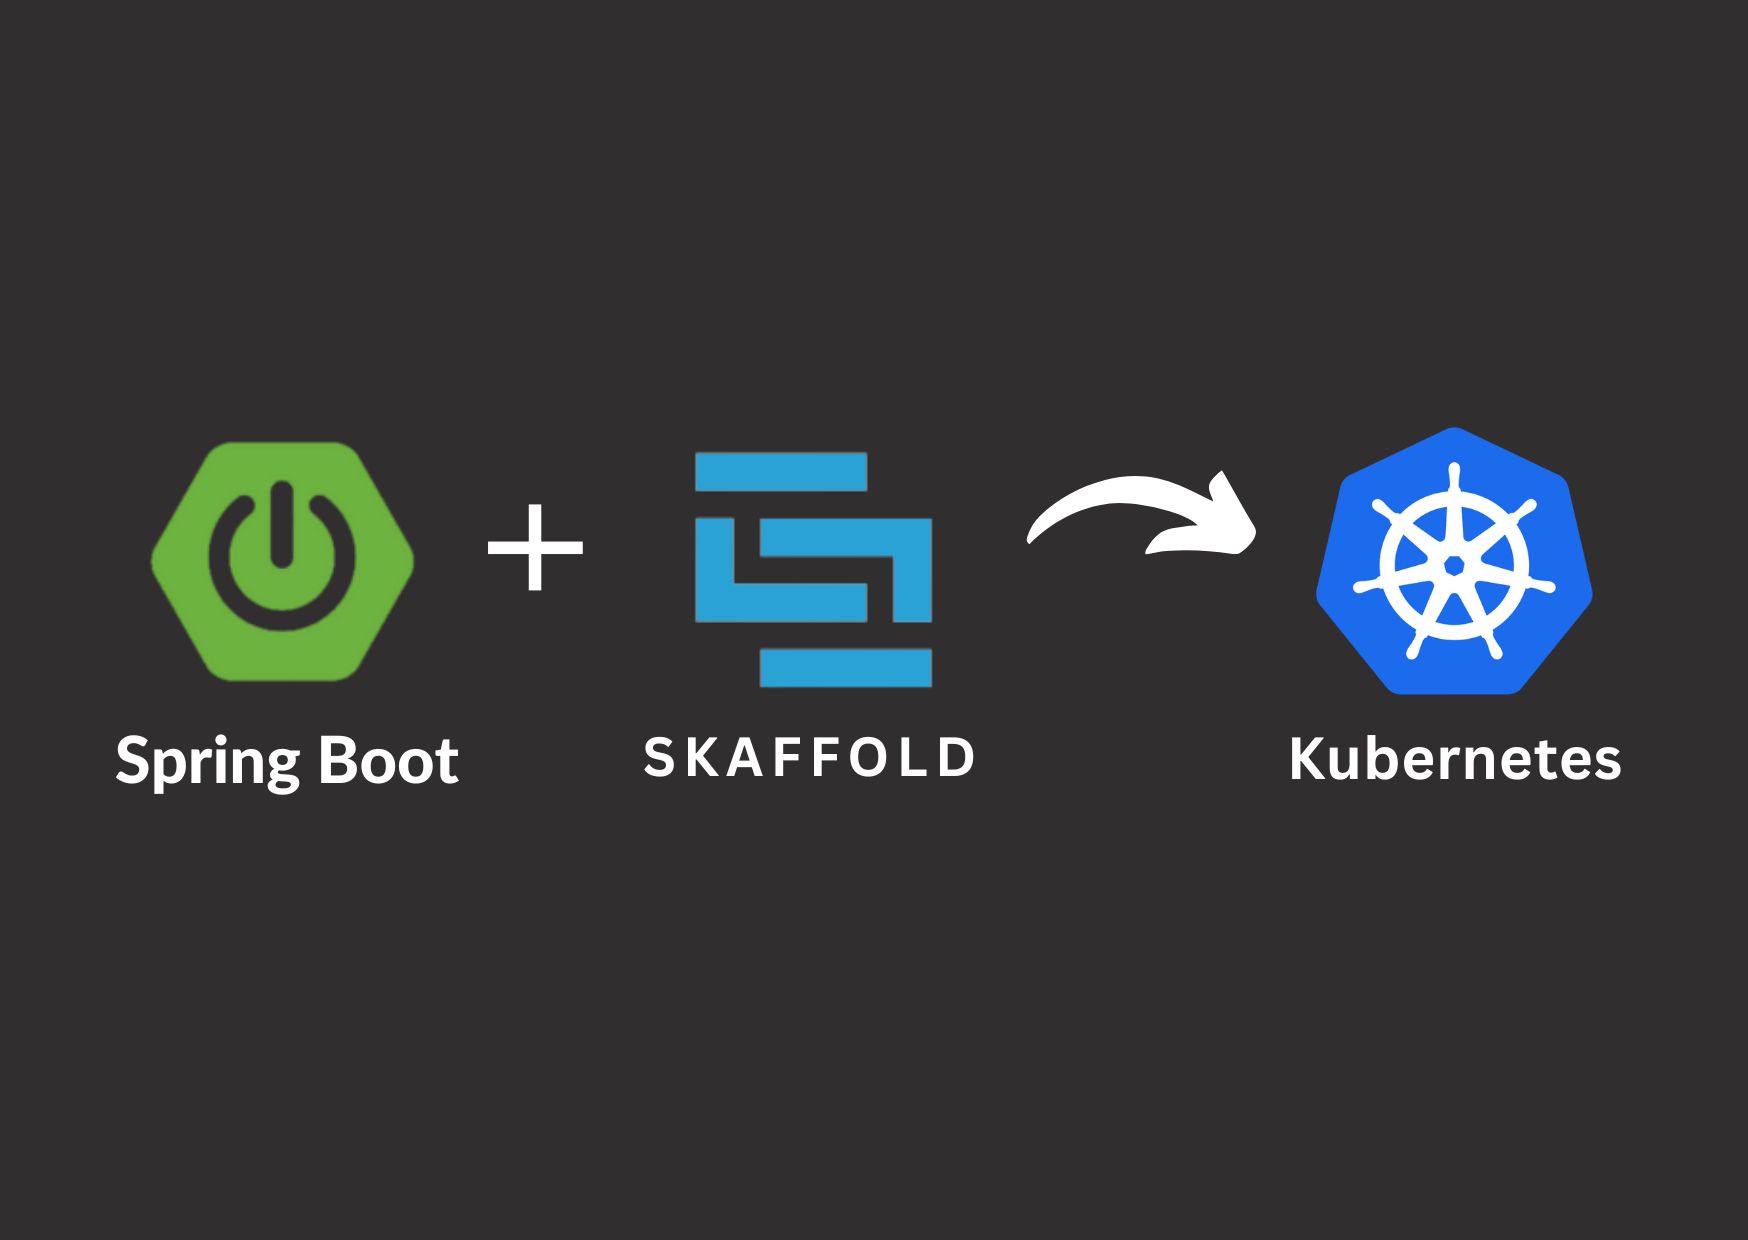 Deploy Application on Kubernetes with Helm, JIB, and Skaffold